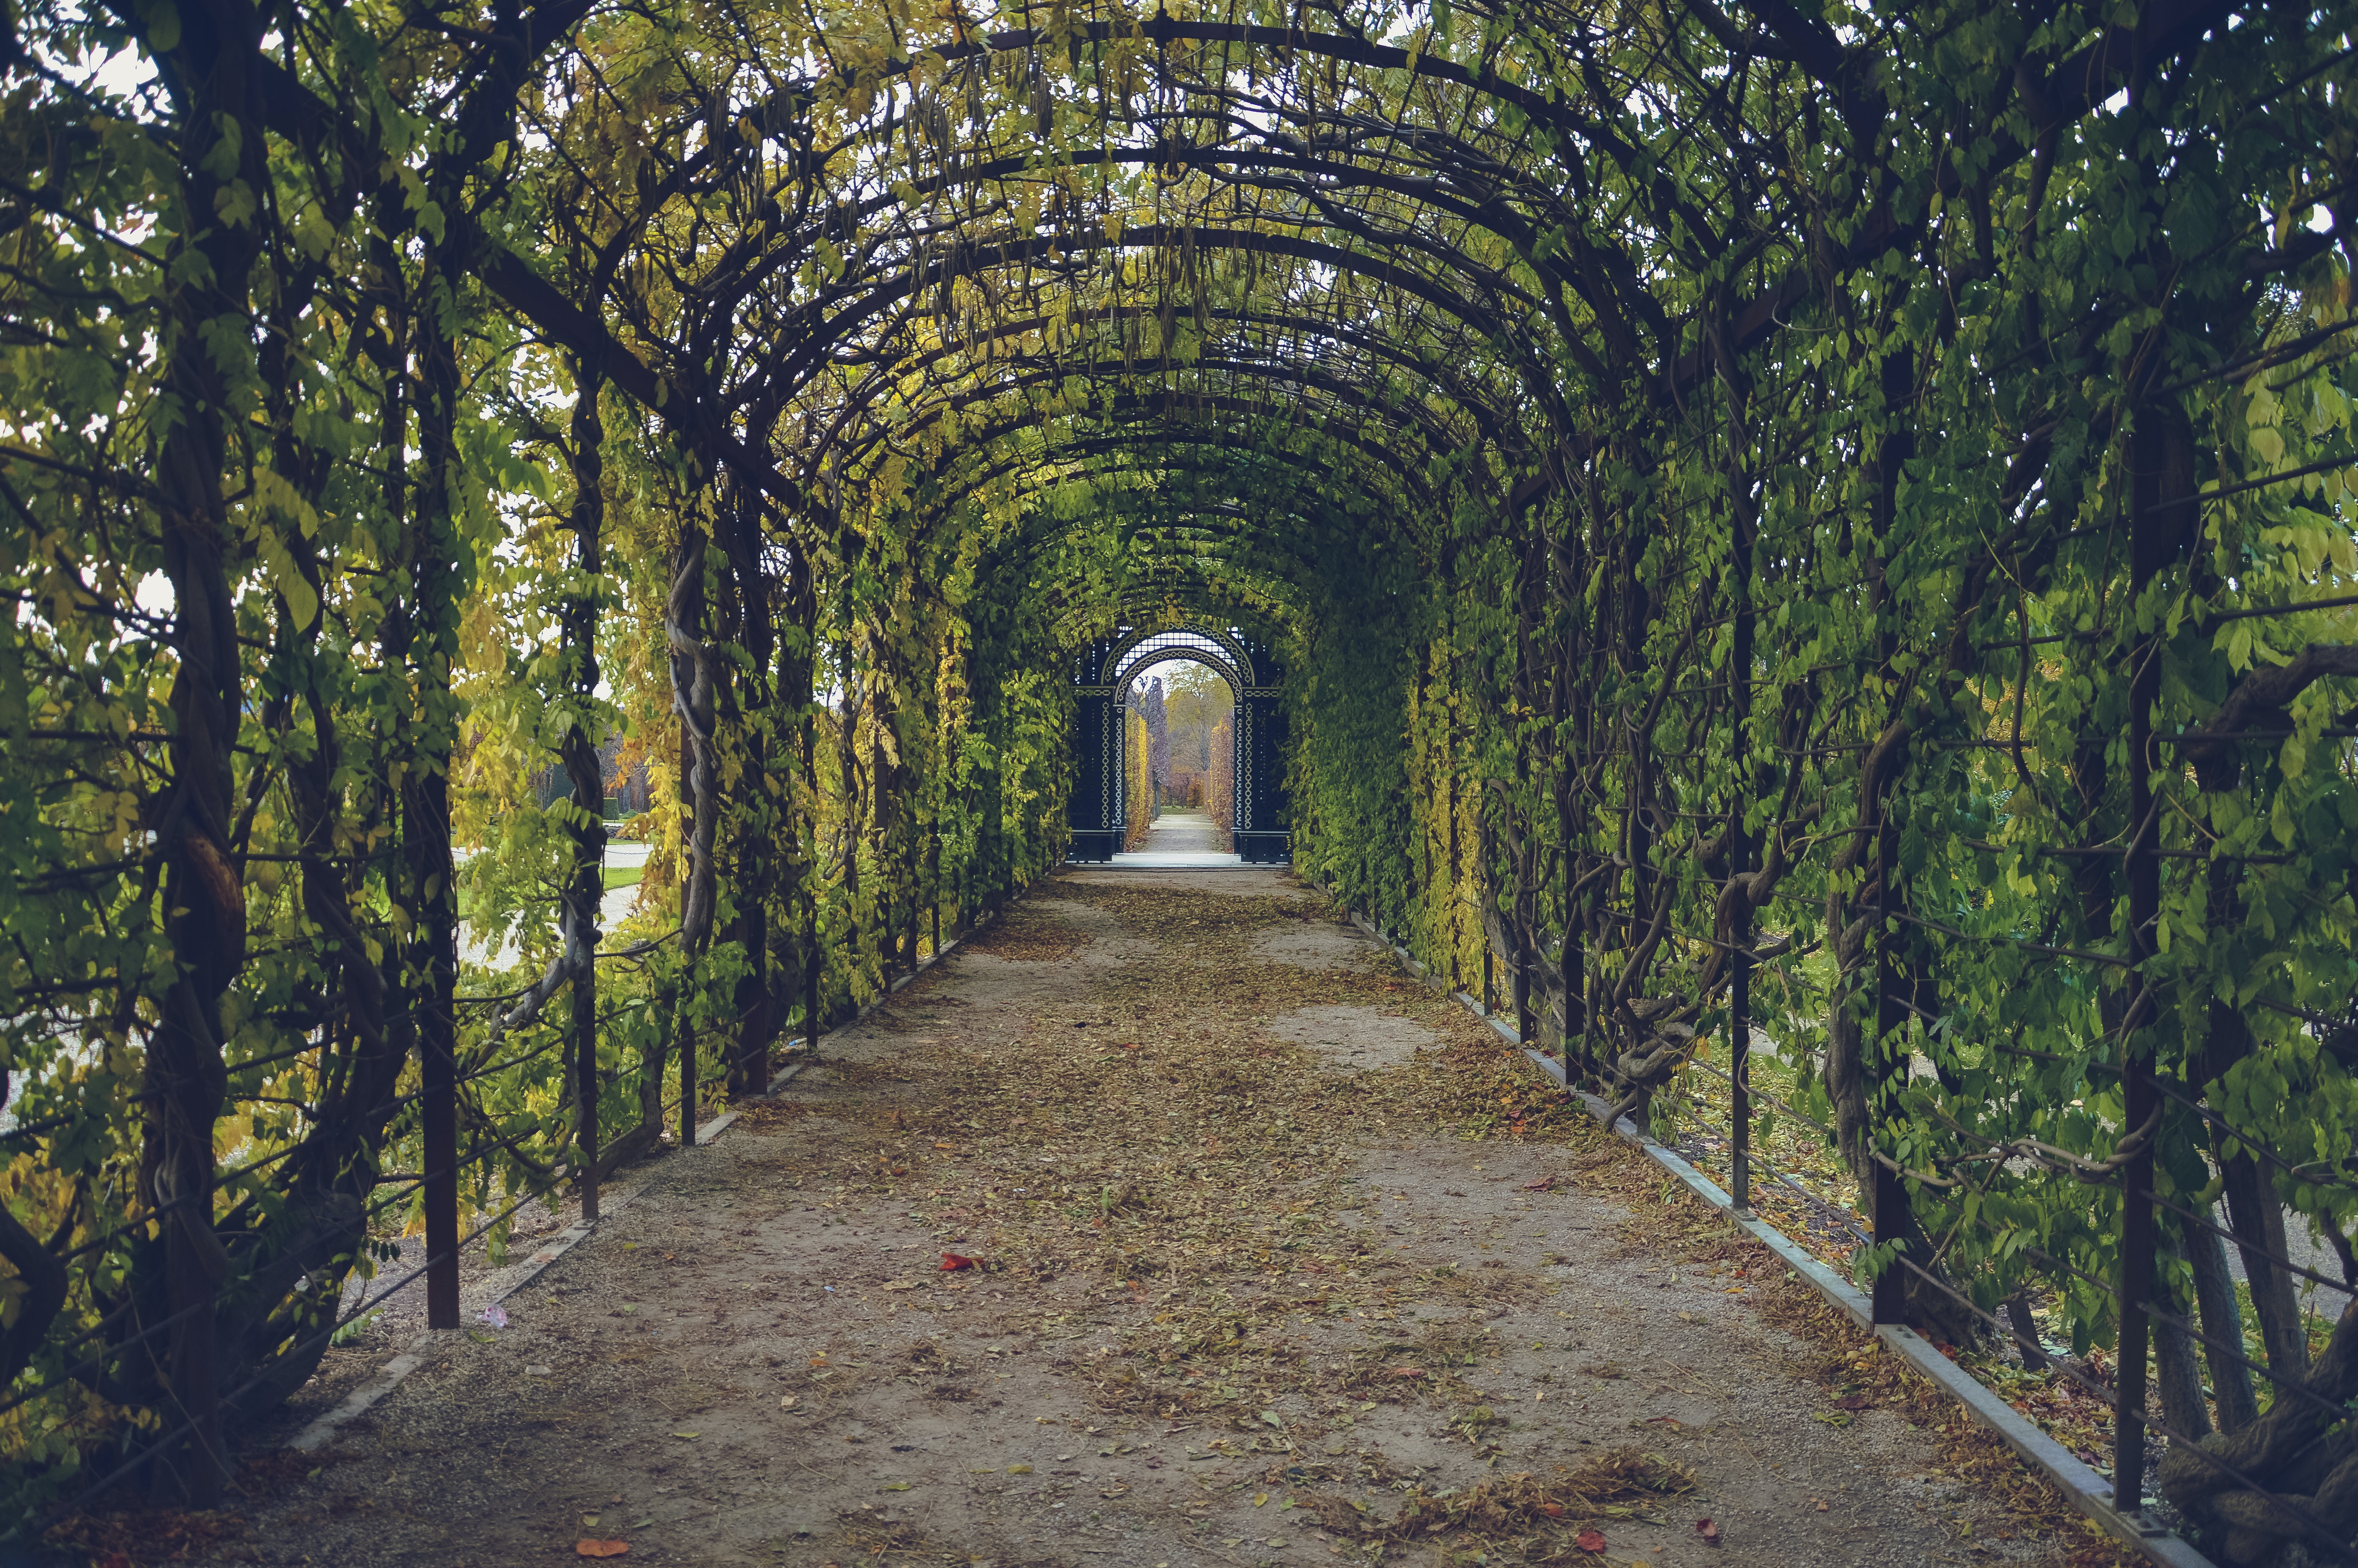 arched walkway made of vining plants